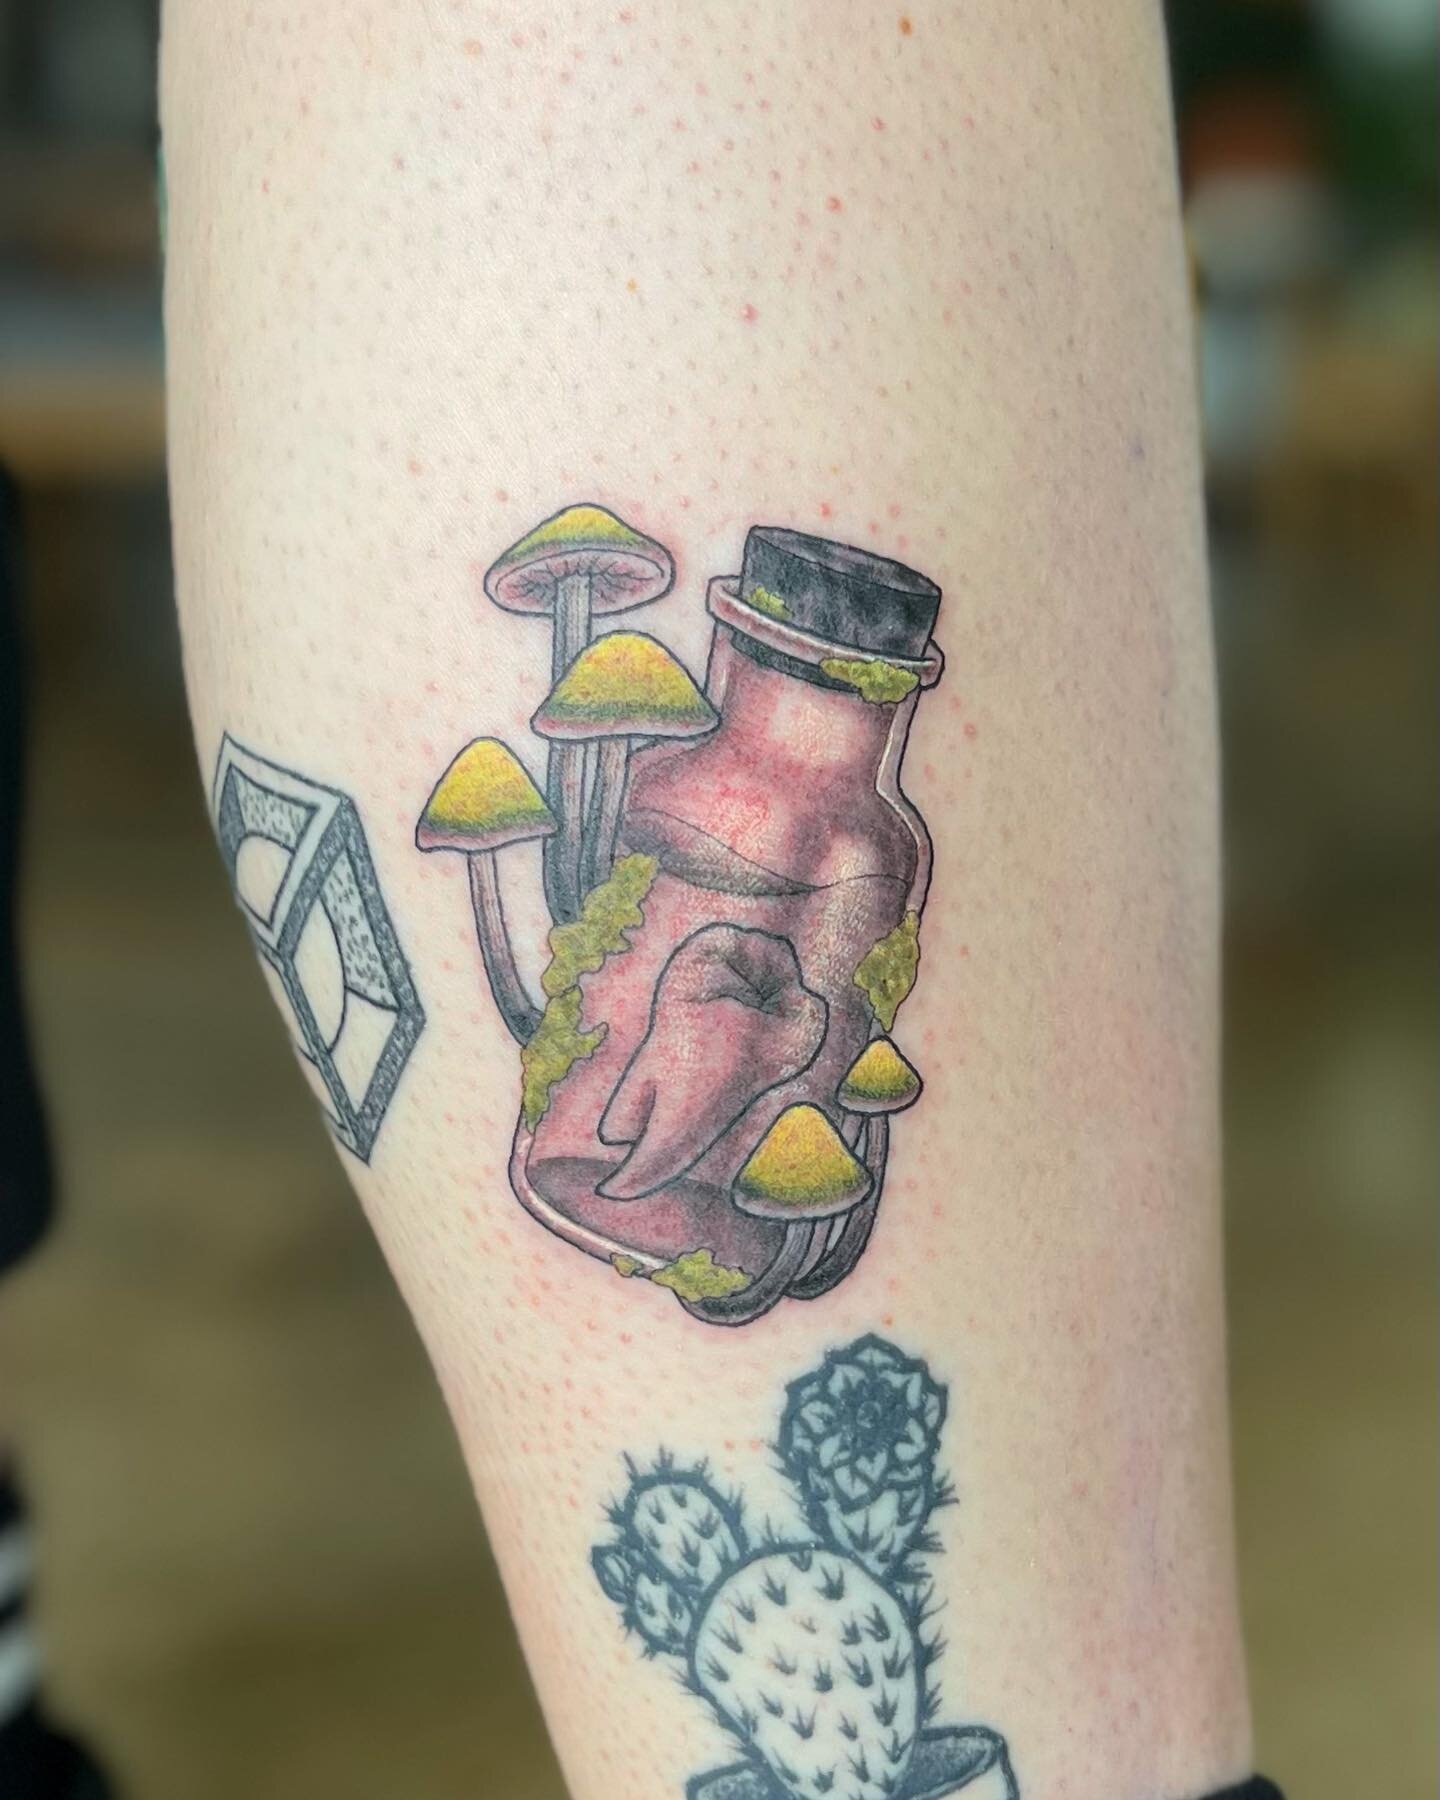 Shroomy tooth
Had fun making this magical tooth jar for Jasey inspired by her mom who was a dentist!
&bull;
#RayCorsonTattoo 
#DallasTattooArtist 
#TexasTattoos
#FemaleTattooer 
#ToothTattoo 
#MushroomTattoo 
#MagicalTattoo